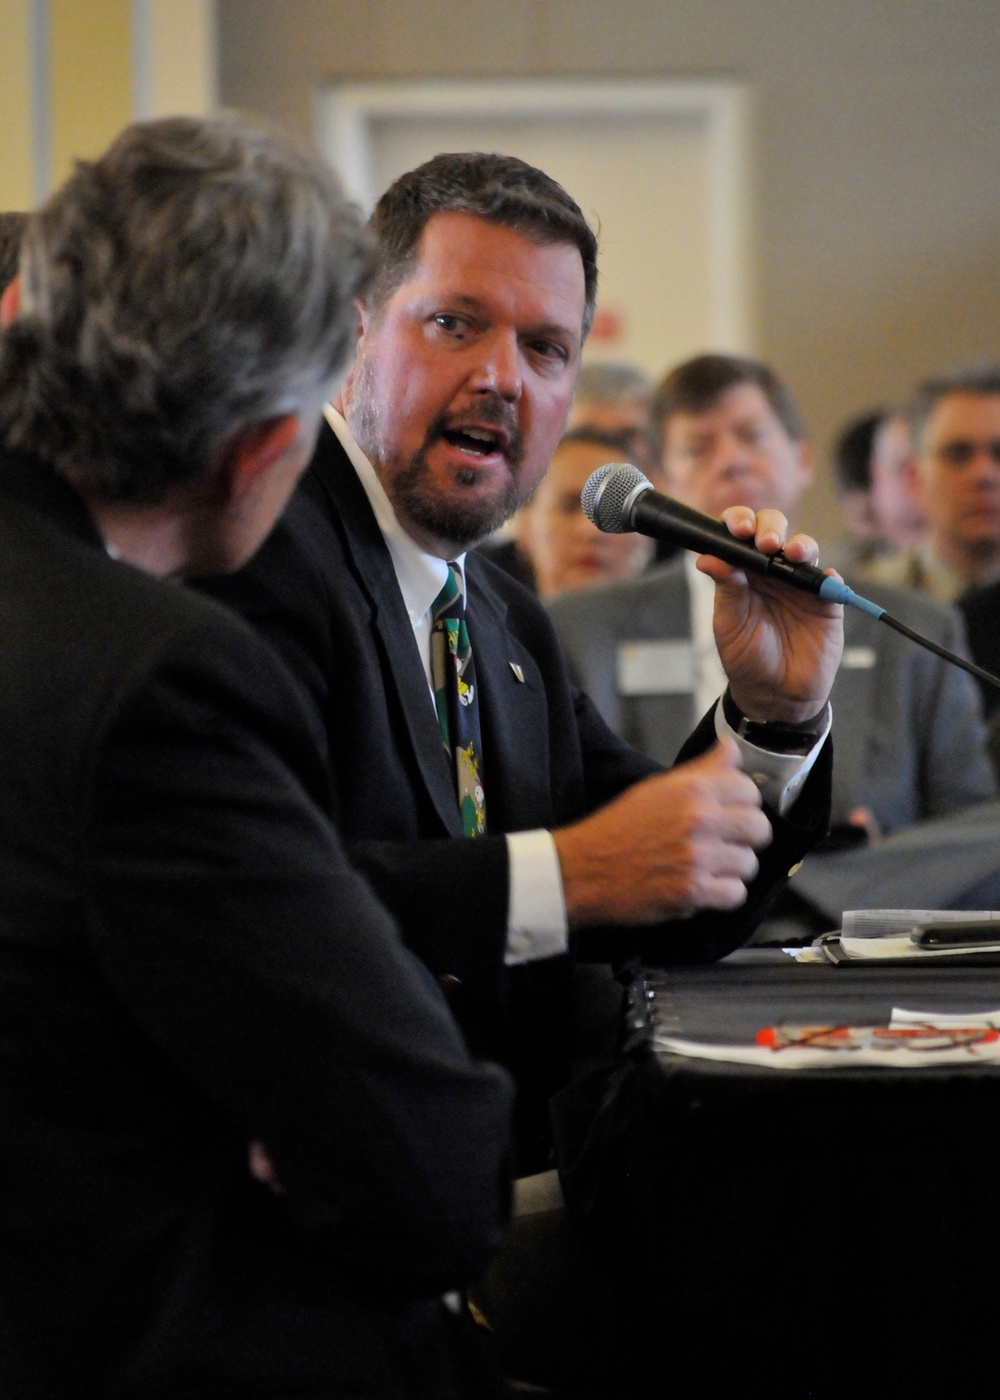 SPAWAR, industry discuss budget environment and IT tech authority topics at roundtable